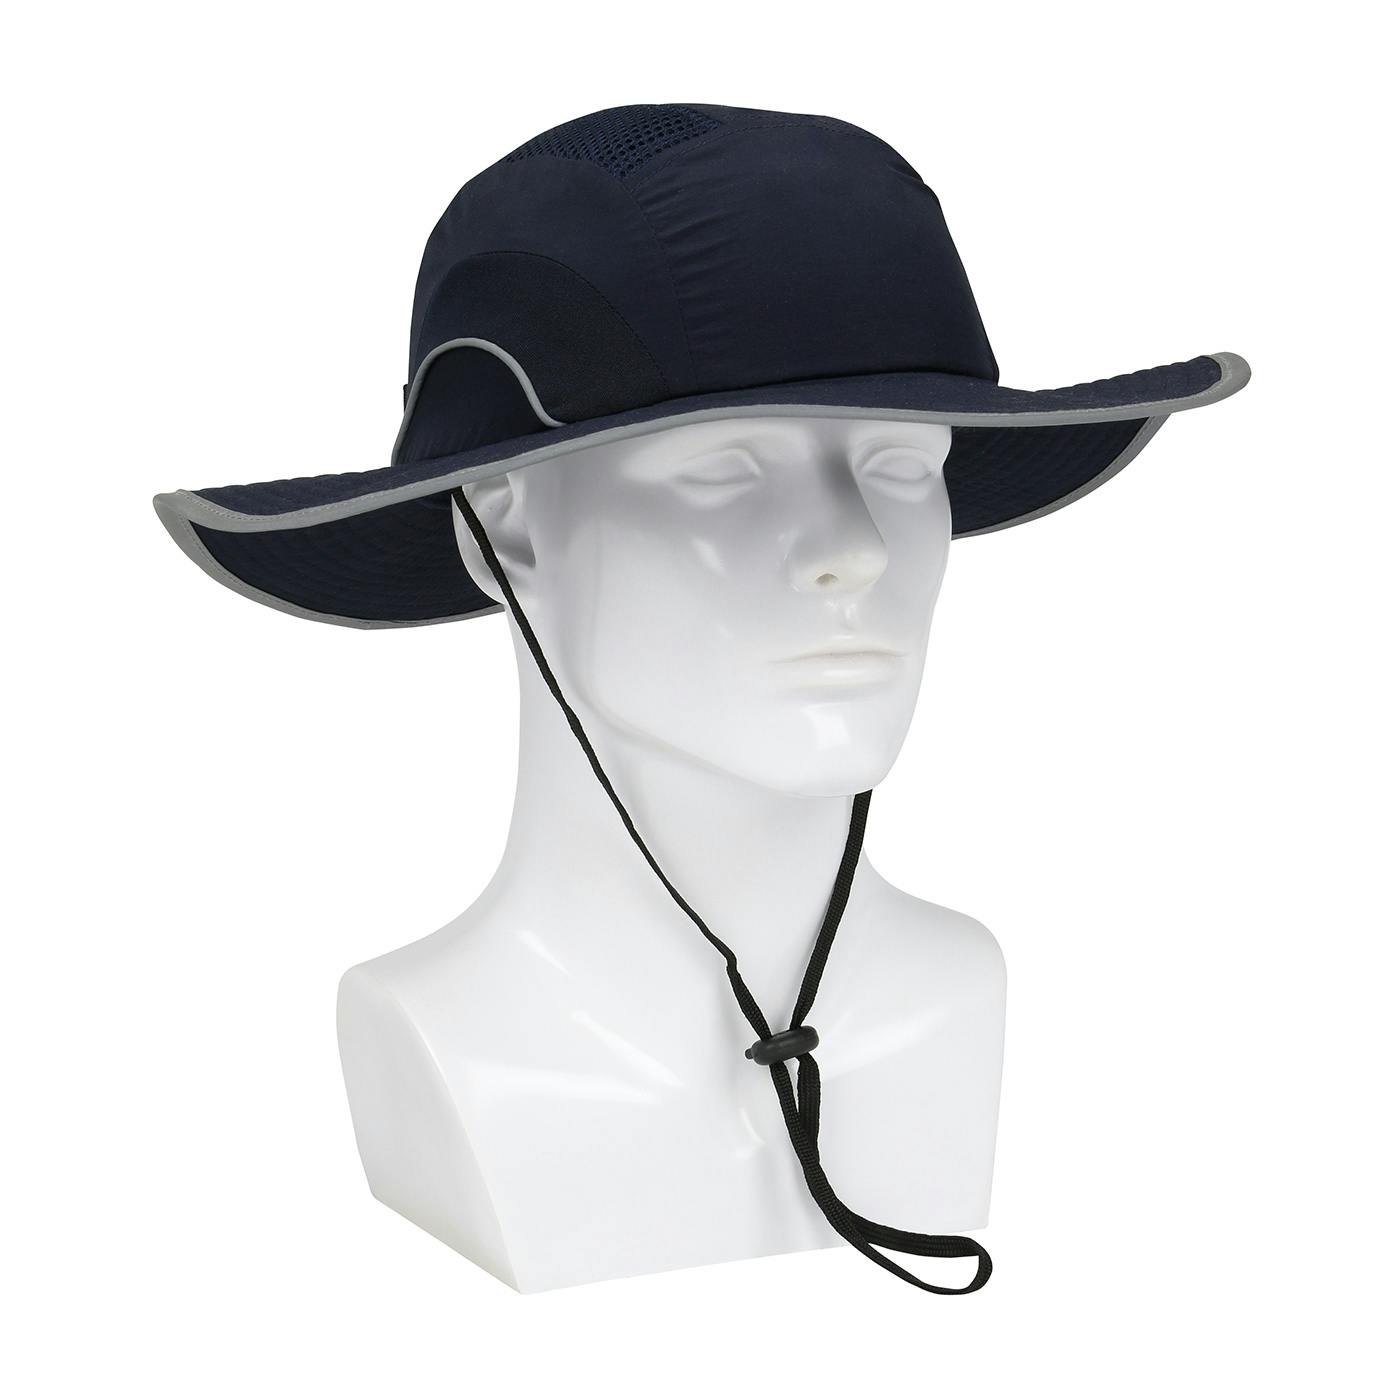 Ranger Style Bump Cap with HDPE Protective Liner, Adjustable Back and Chin Strap, Navy (282-AFB375-21) - OS_0